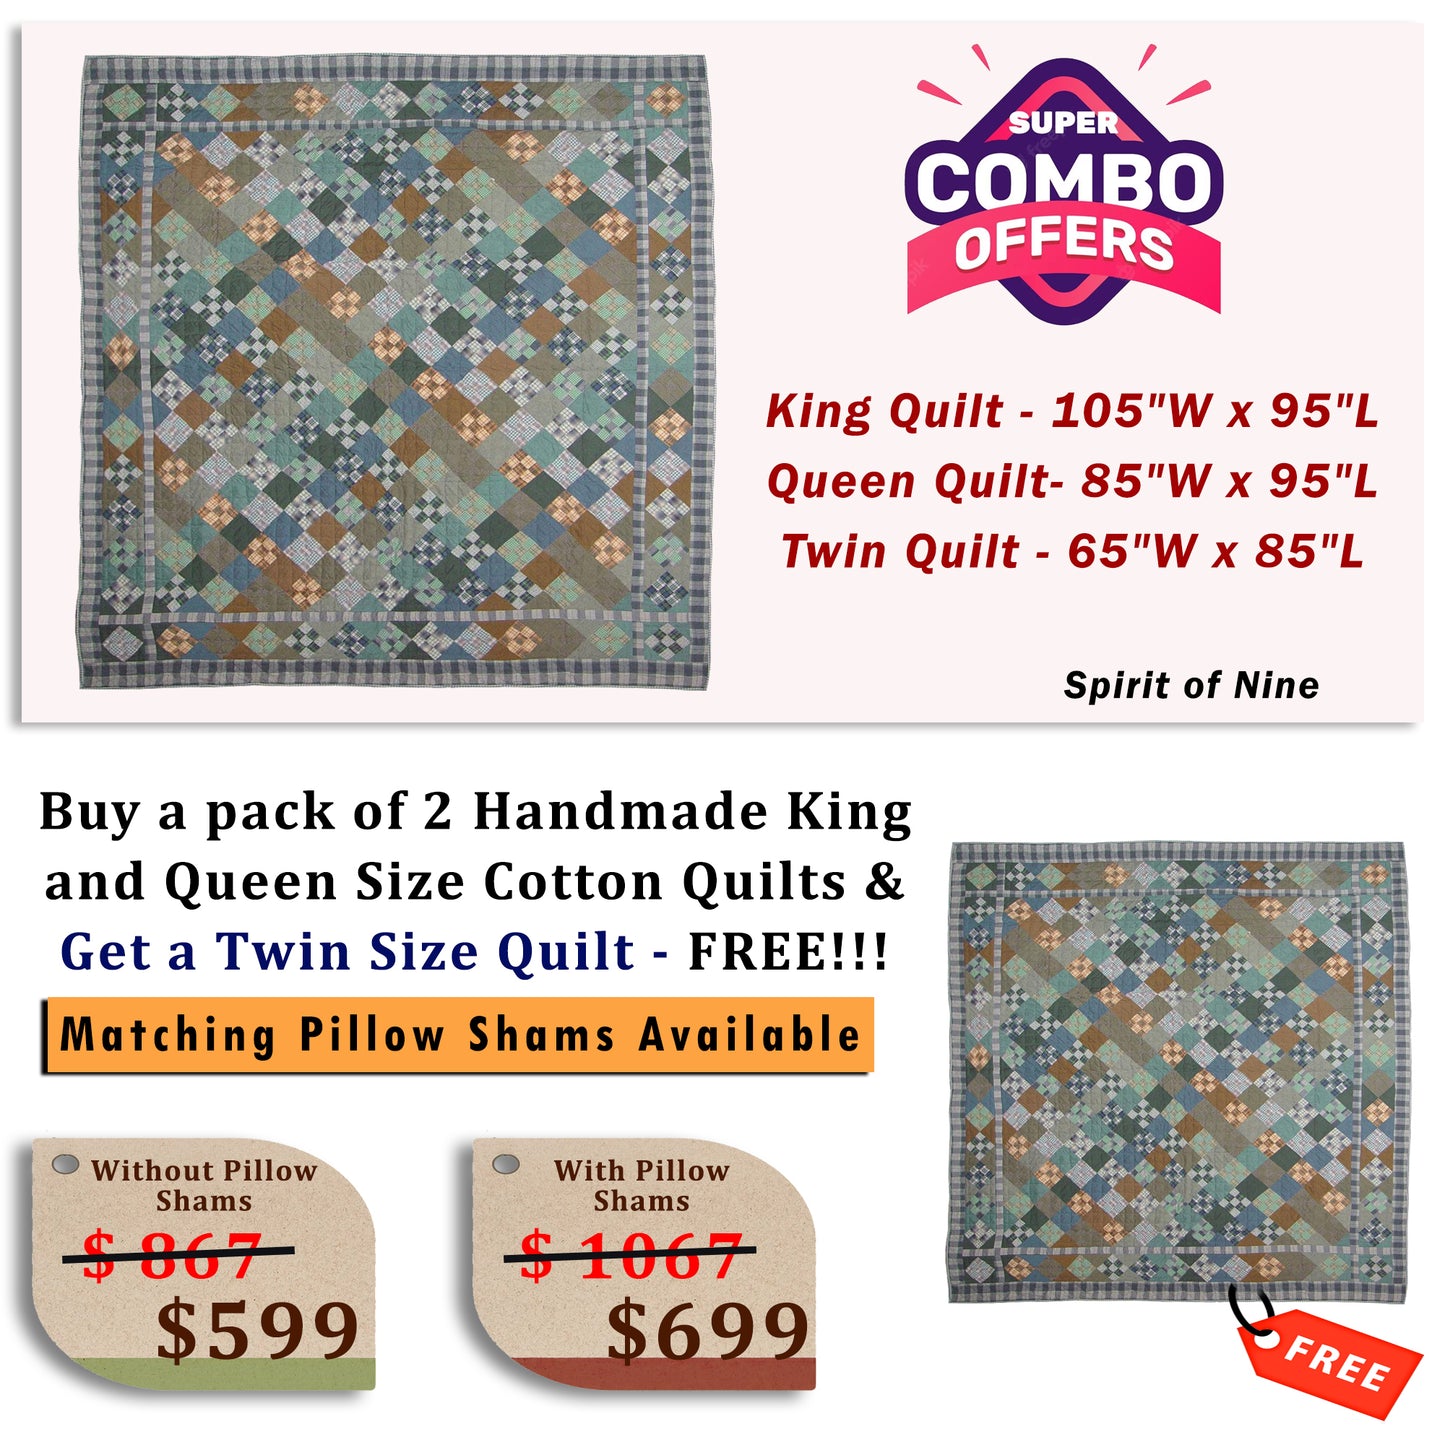 Spirit of Nine - Buy a pack of King and Queen Size Quilt, and get a Twin Size Quilt FREE!!!